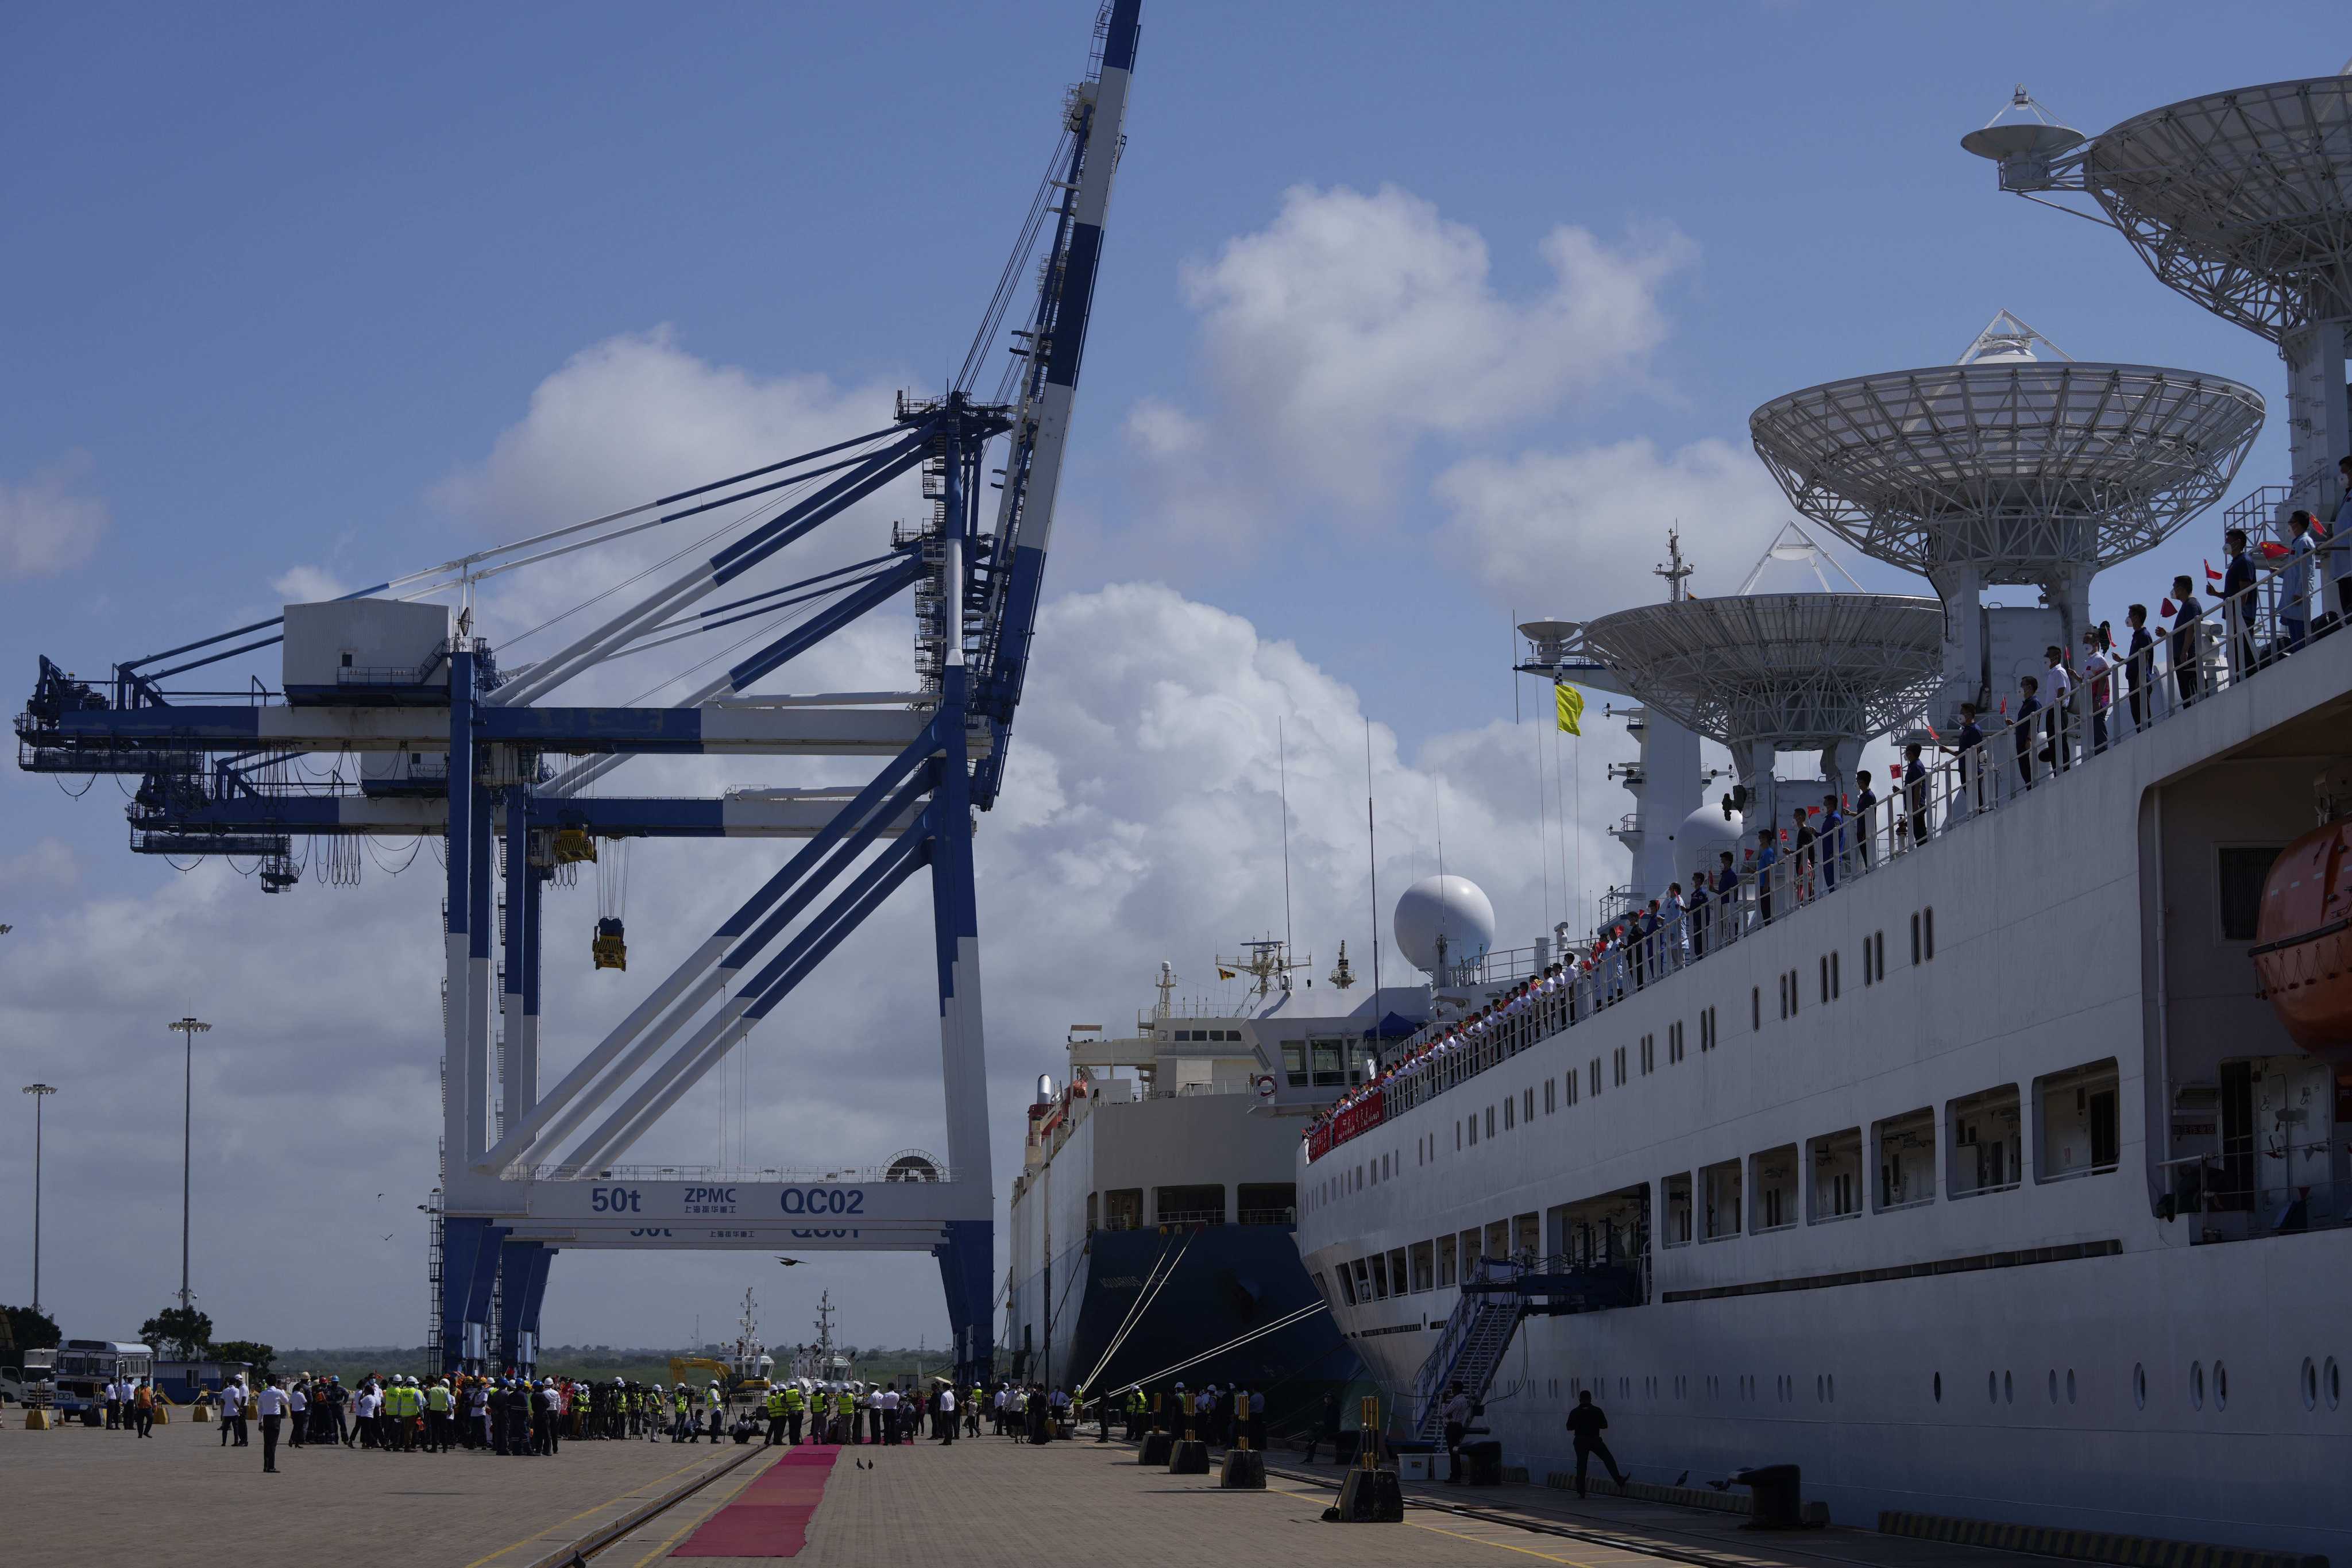 Chinese research ship Yuan Wang 5, right, is seen berthed at the Hambantota International Port in Hambantota, Sri Lanka on Tuesday. The ship was originally set to arrive Aug. 11 but the port call was deferred due to apparent security concerns raised by India. Photo: AP/File